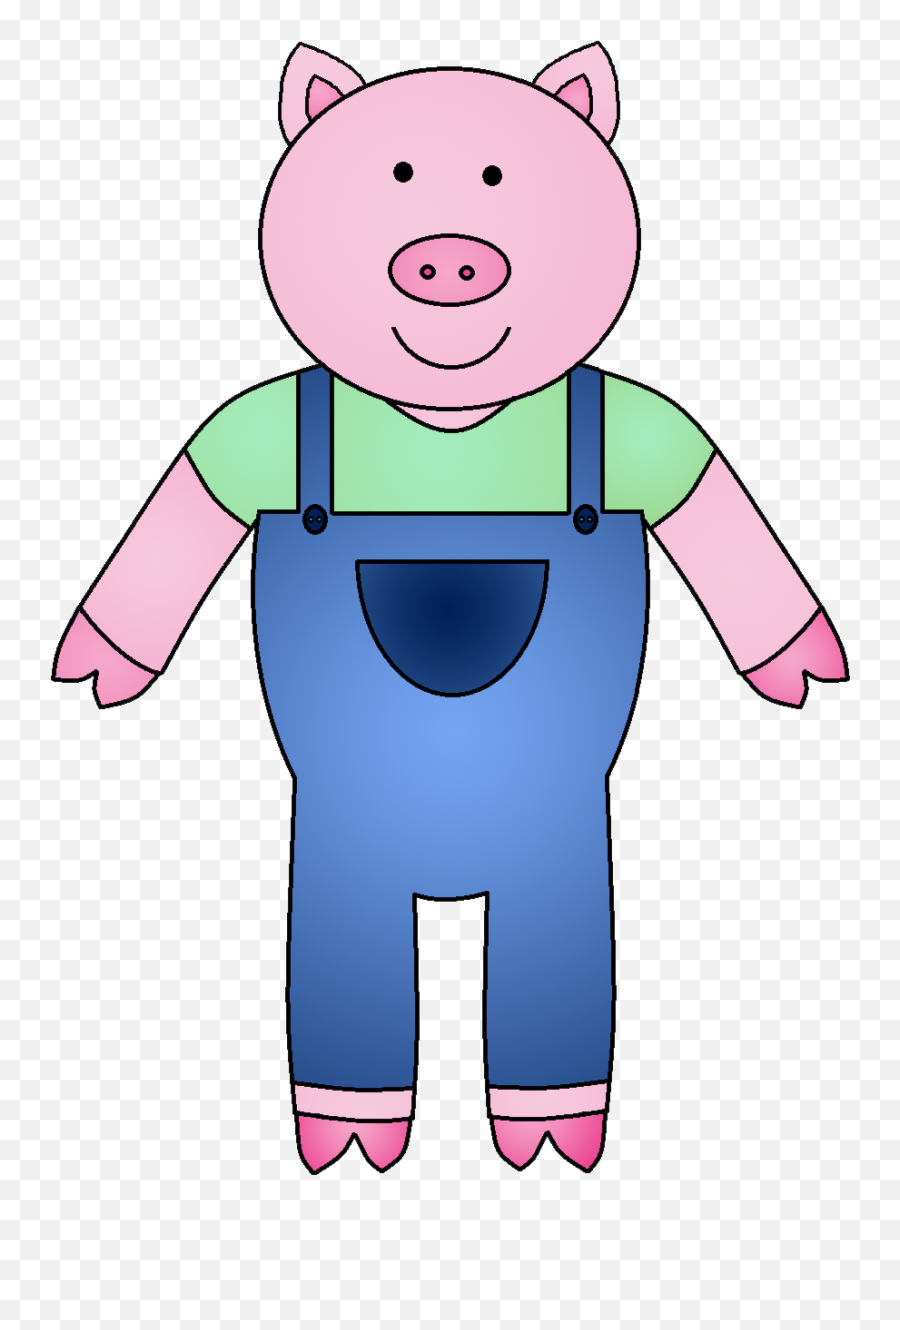 Clipart Houses Three Little Pig Clipart Houses Three Little - Three Little Pigs Pig Emoji,Pig Emoji Pillow